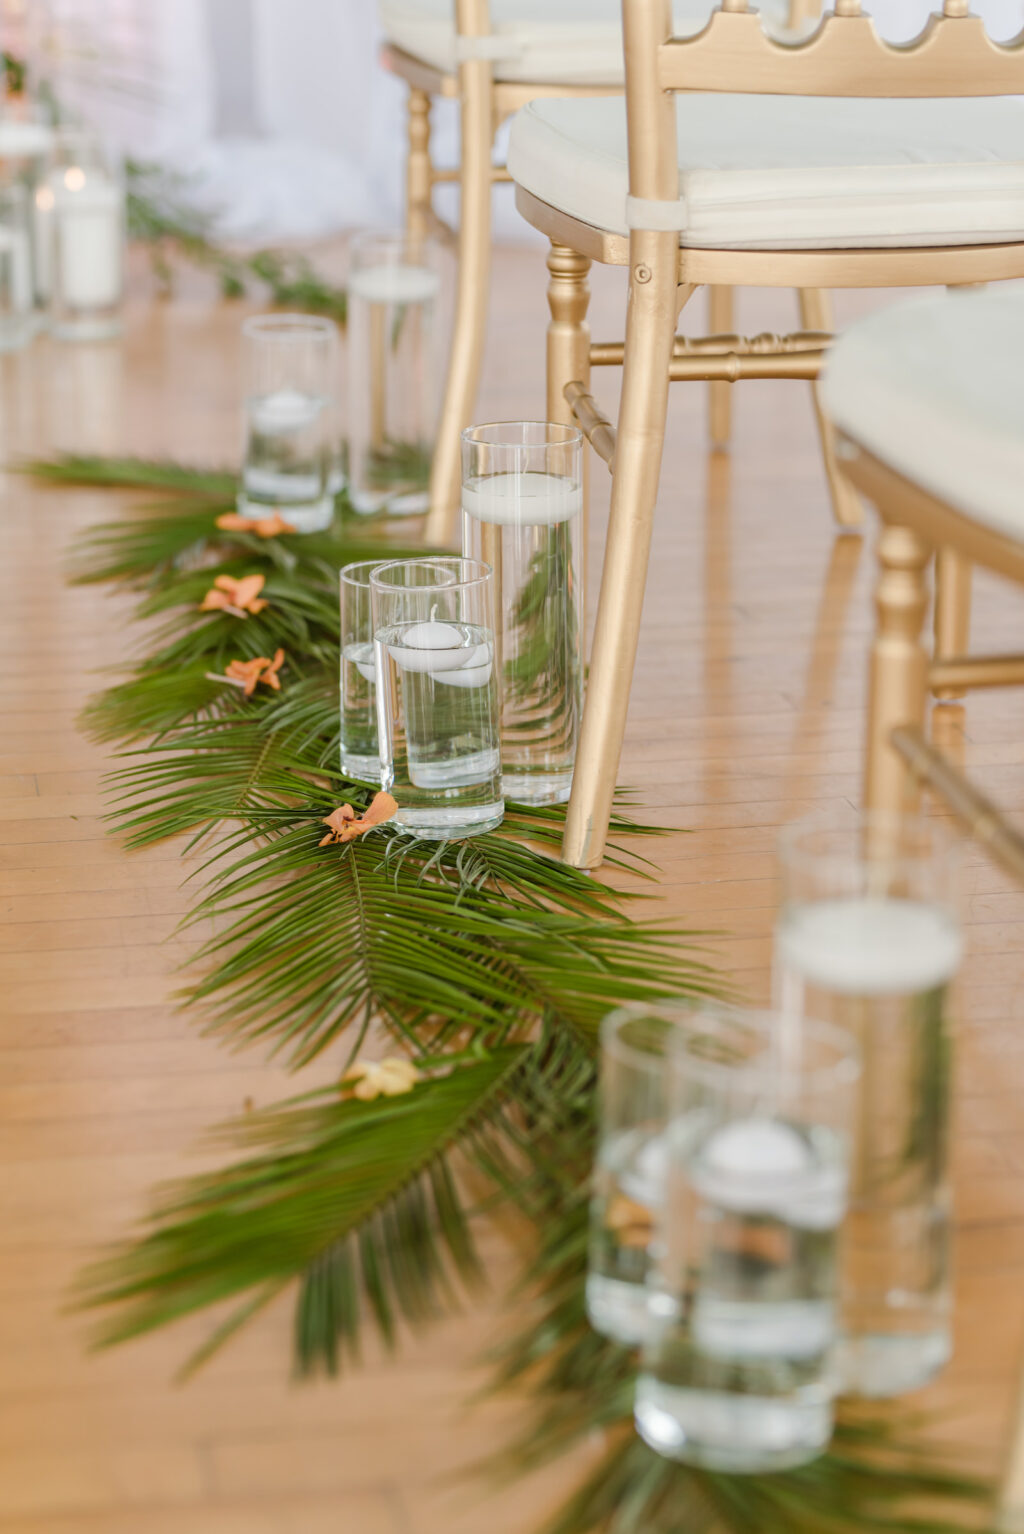 Tropical Wedding Ceremony Decor, Floating Candles, Palm Fronds Lining Aisle | Tampa Bay Wedding Planner Eventfull Weddings